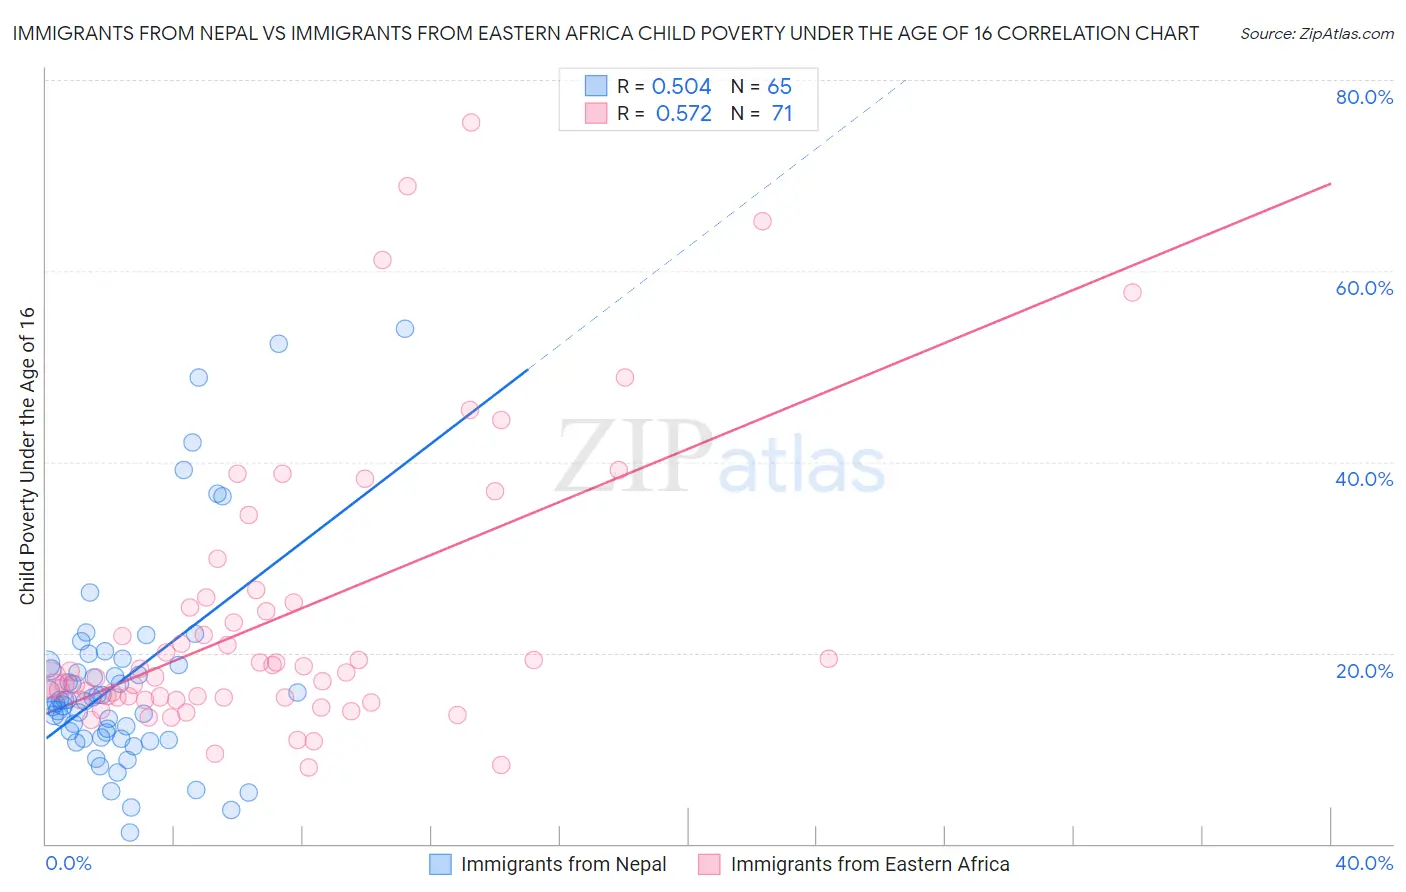 Immigrants from Nepal vs Immigrants from Eastern Africa Child Poverty Under the Age of 16